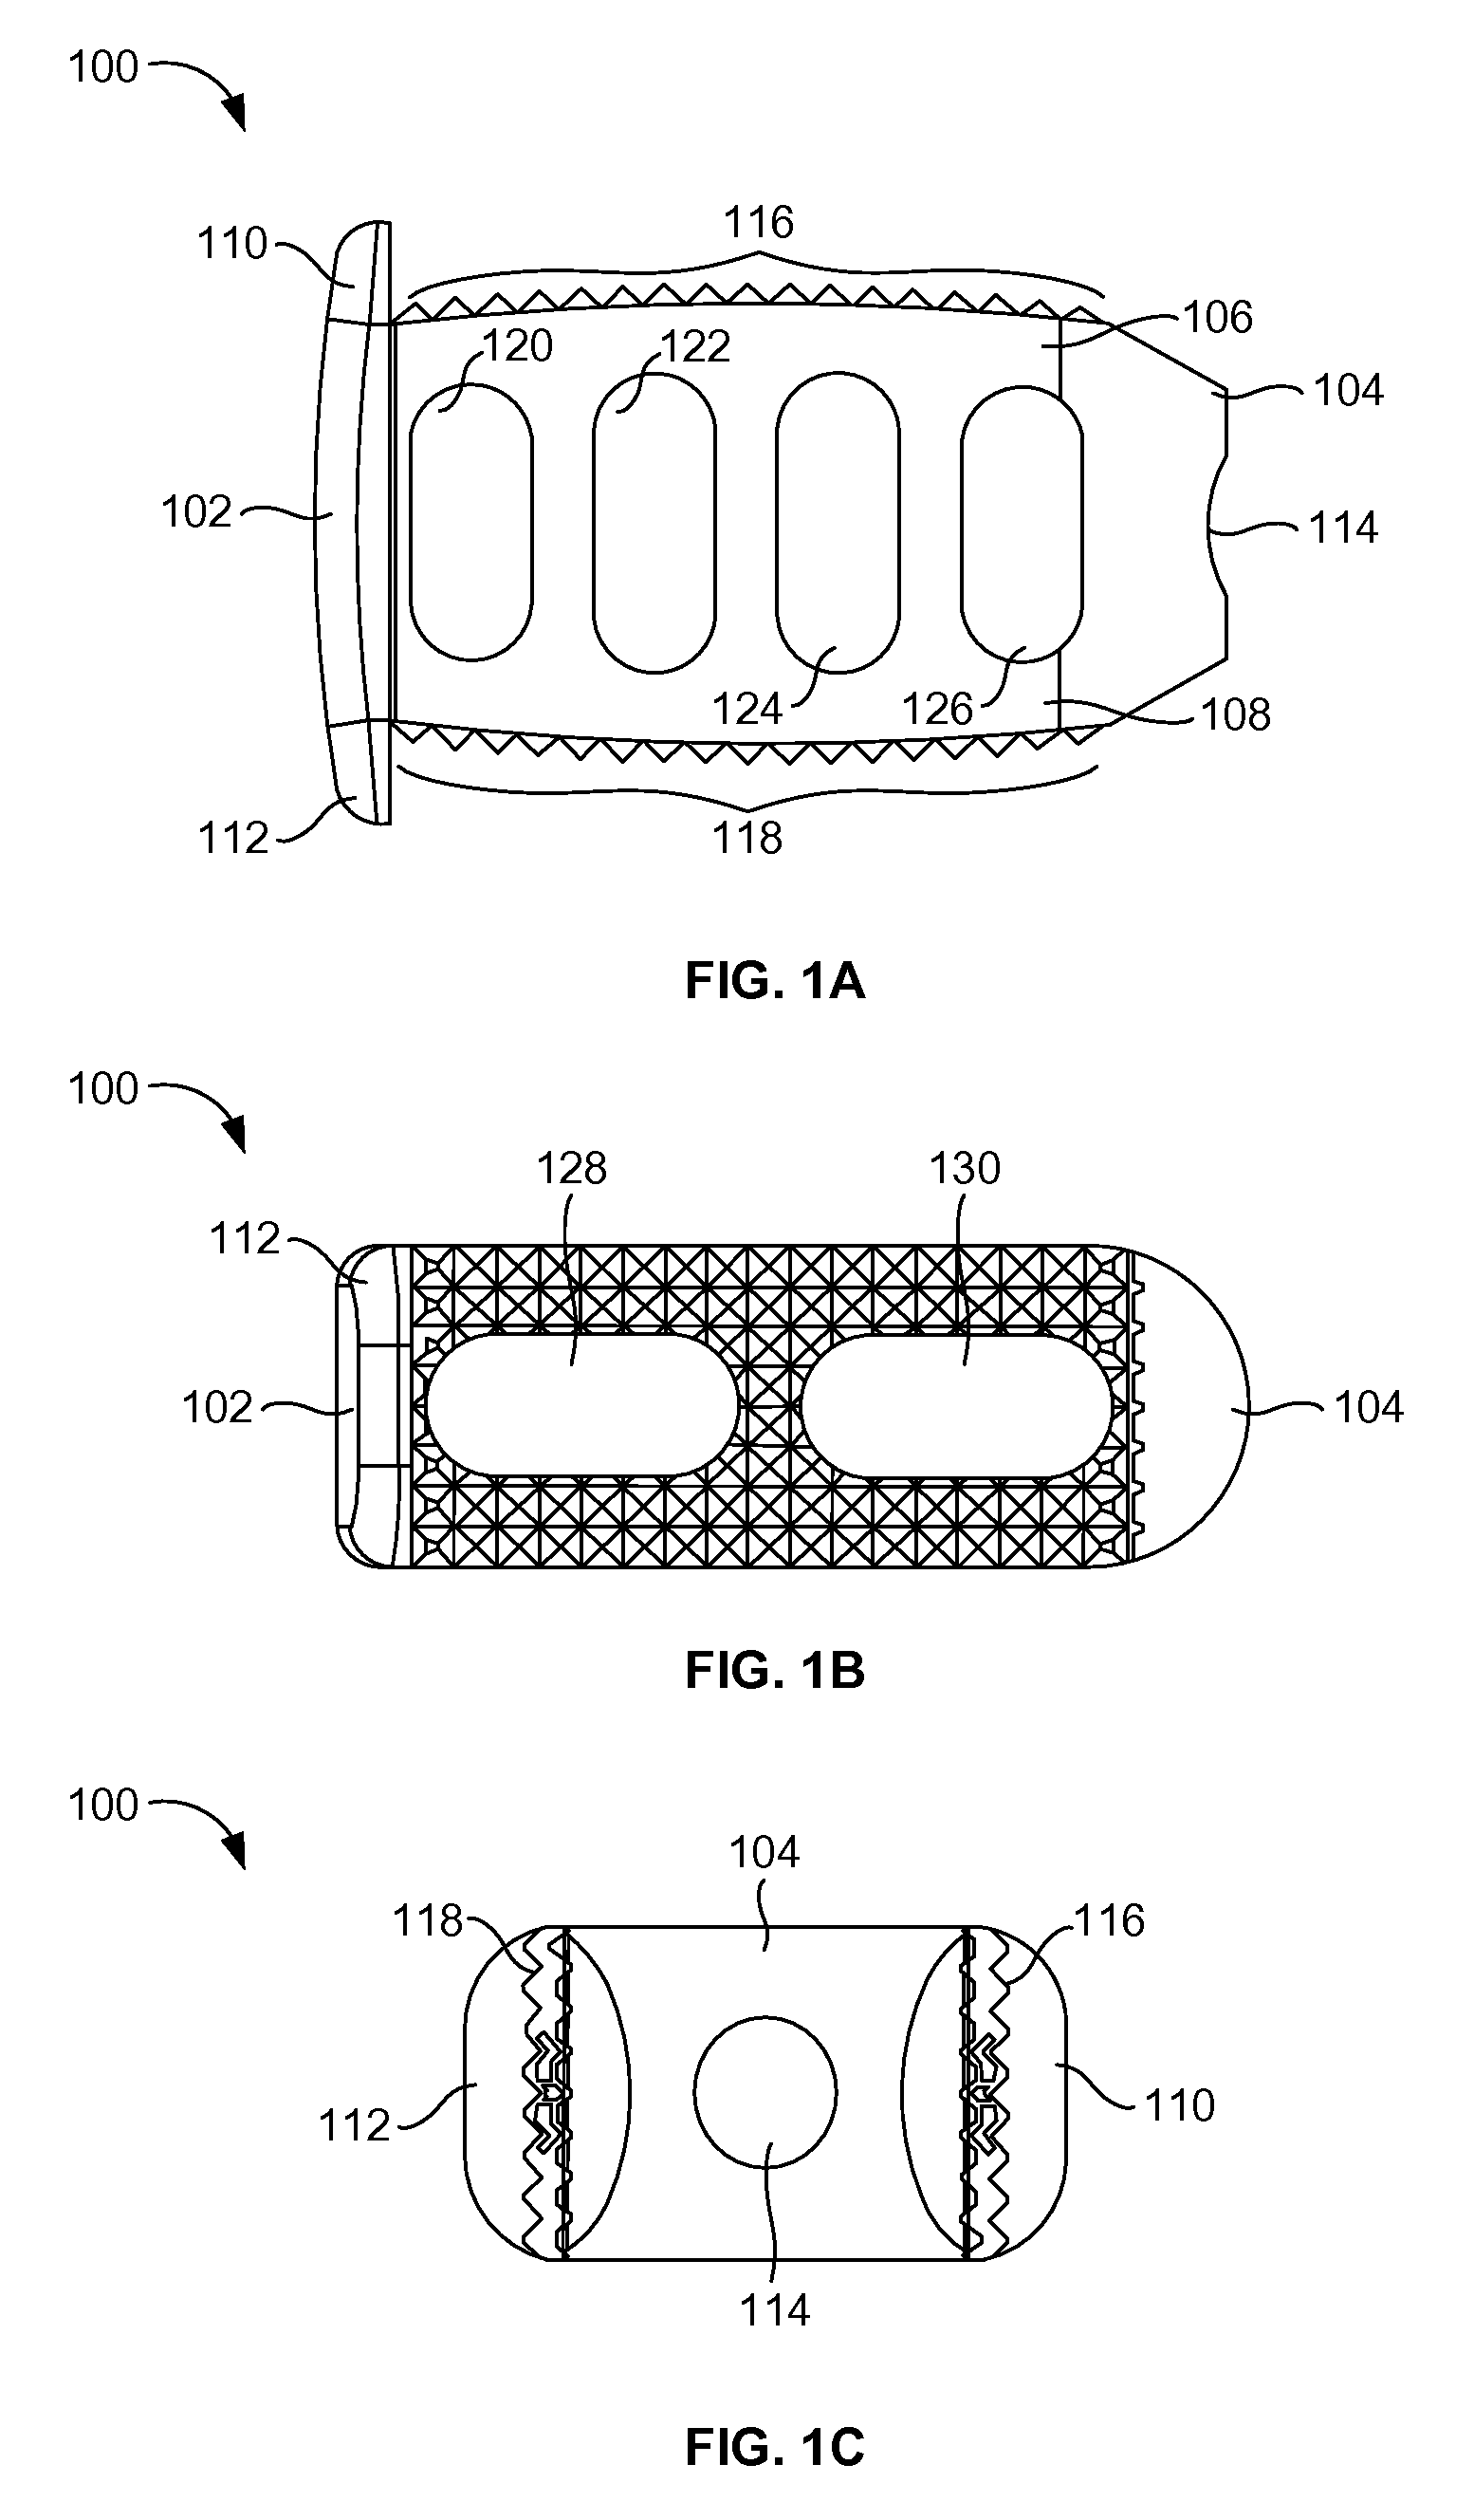 Flanged interbody device